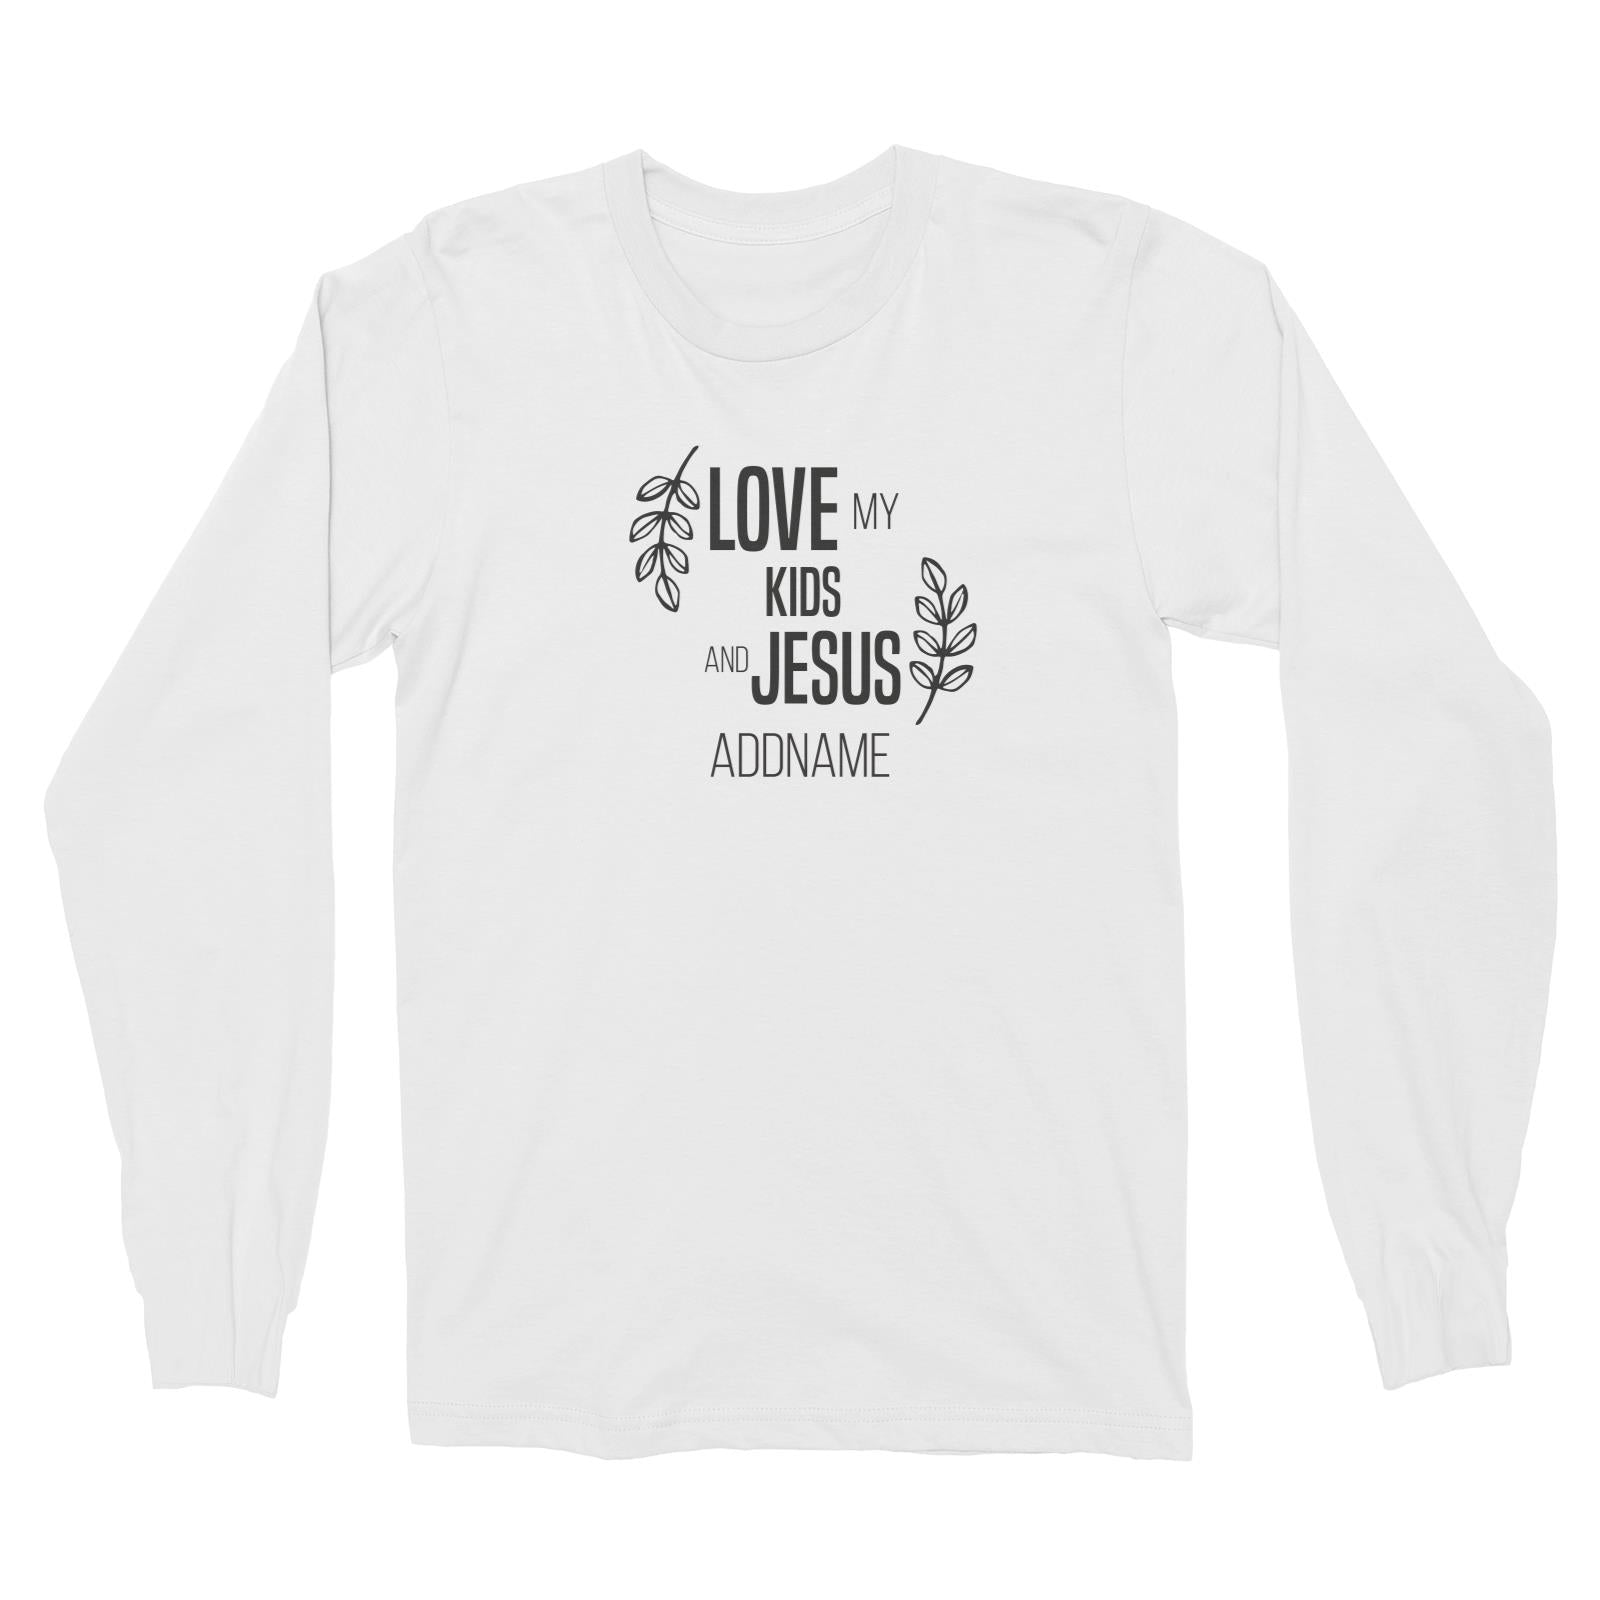 Christian Series Love My Kids And Jesus Addname Long Sleeve Unisex T-Shirt